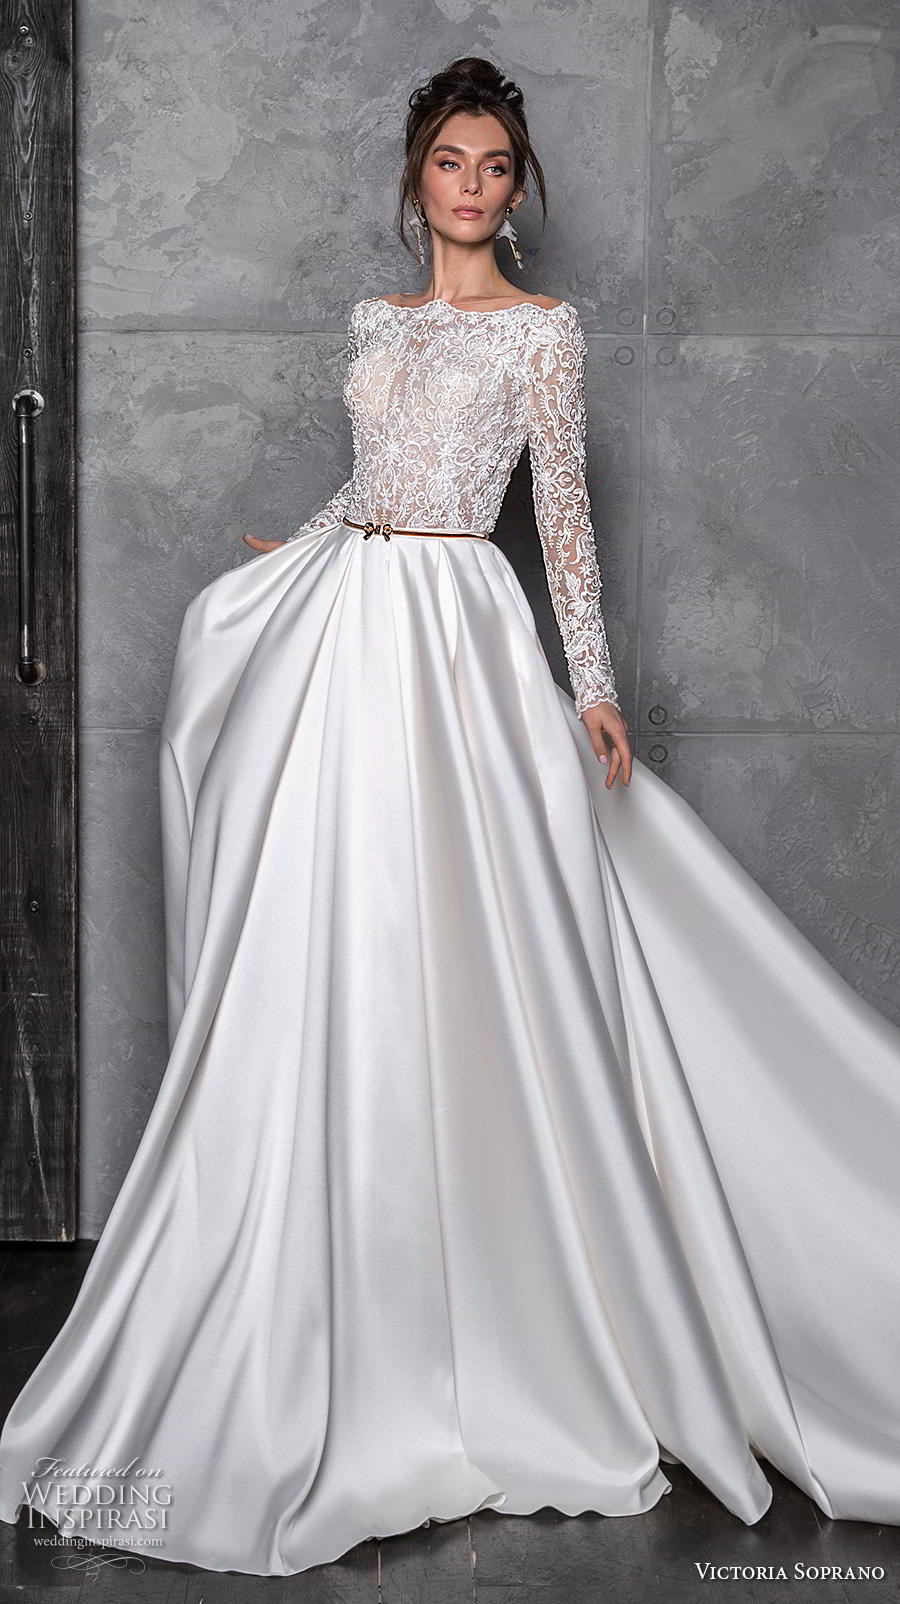 Wedding Gowns 2020 Collection
 Victoria Soprano 2020 Wedding Dresses — “Chic Royal